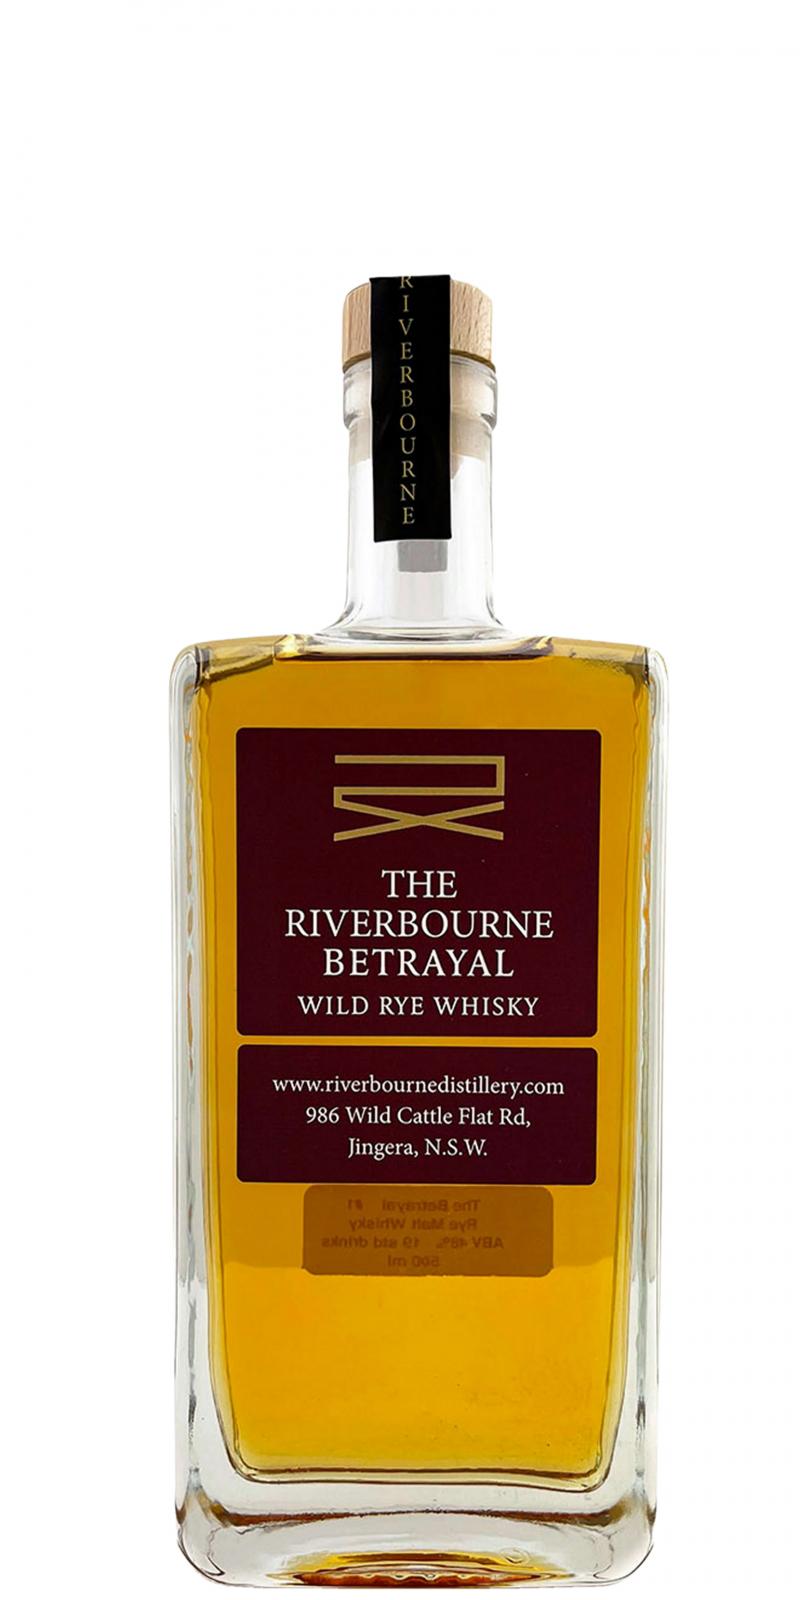 The Riverbourne The Betrayal #1 48% 500ml